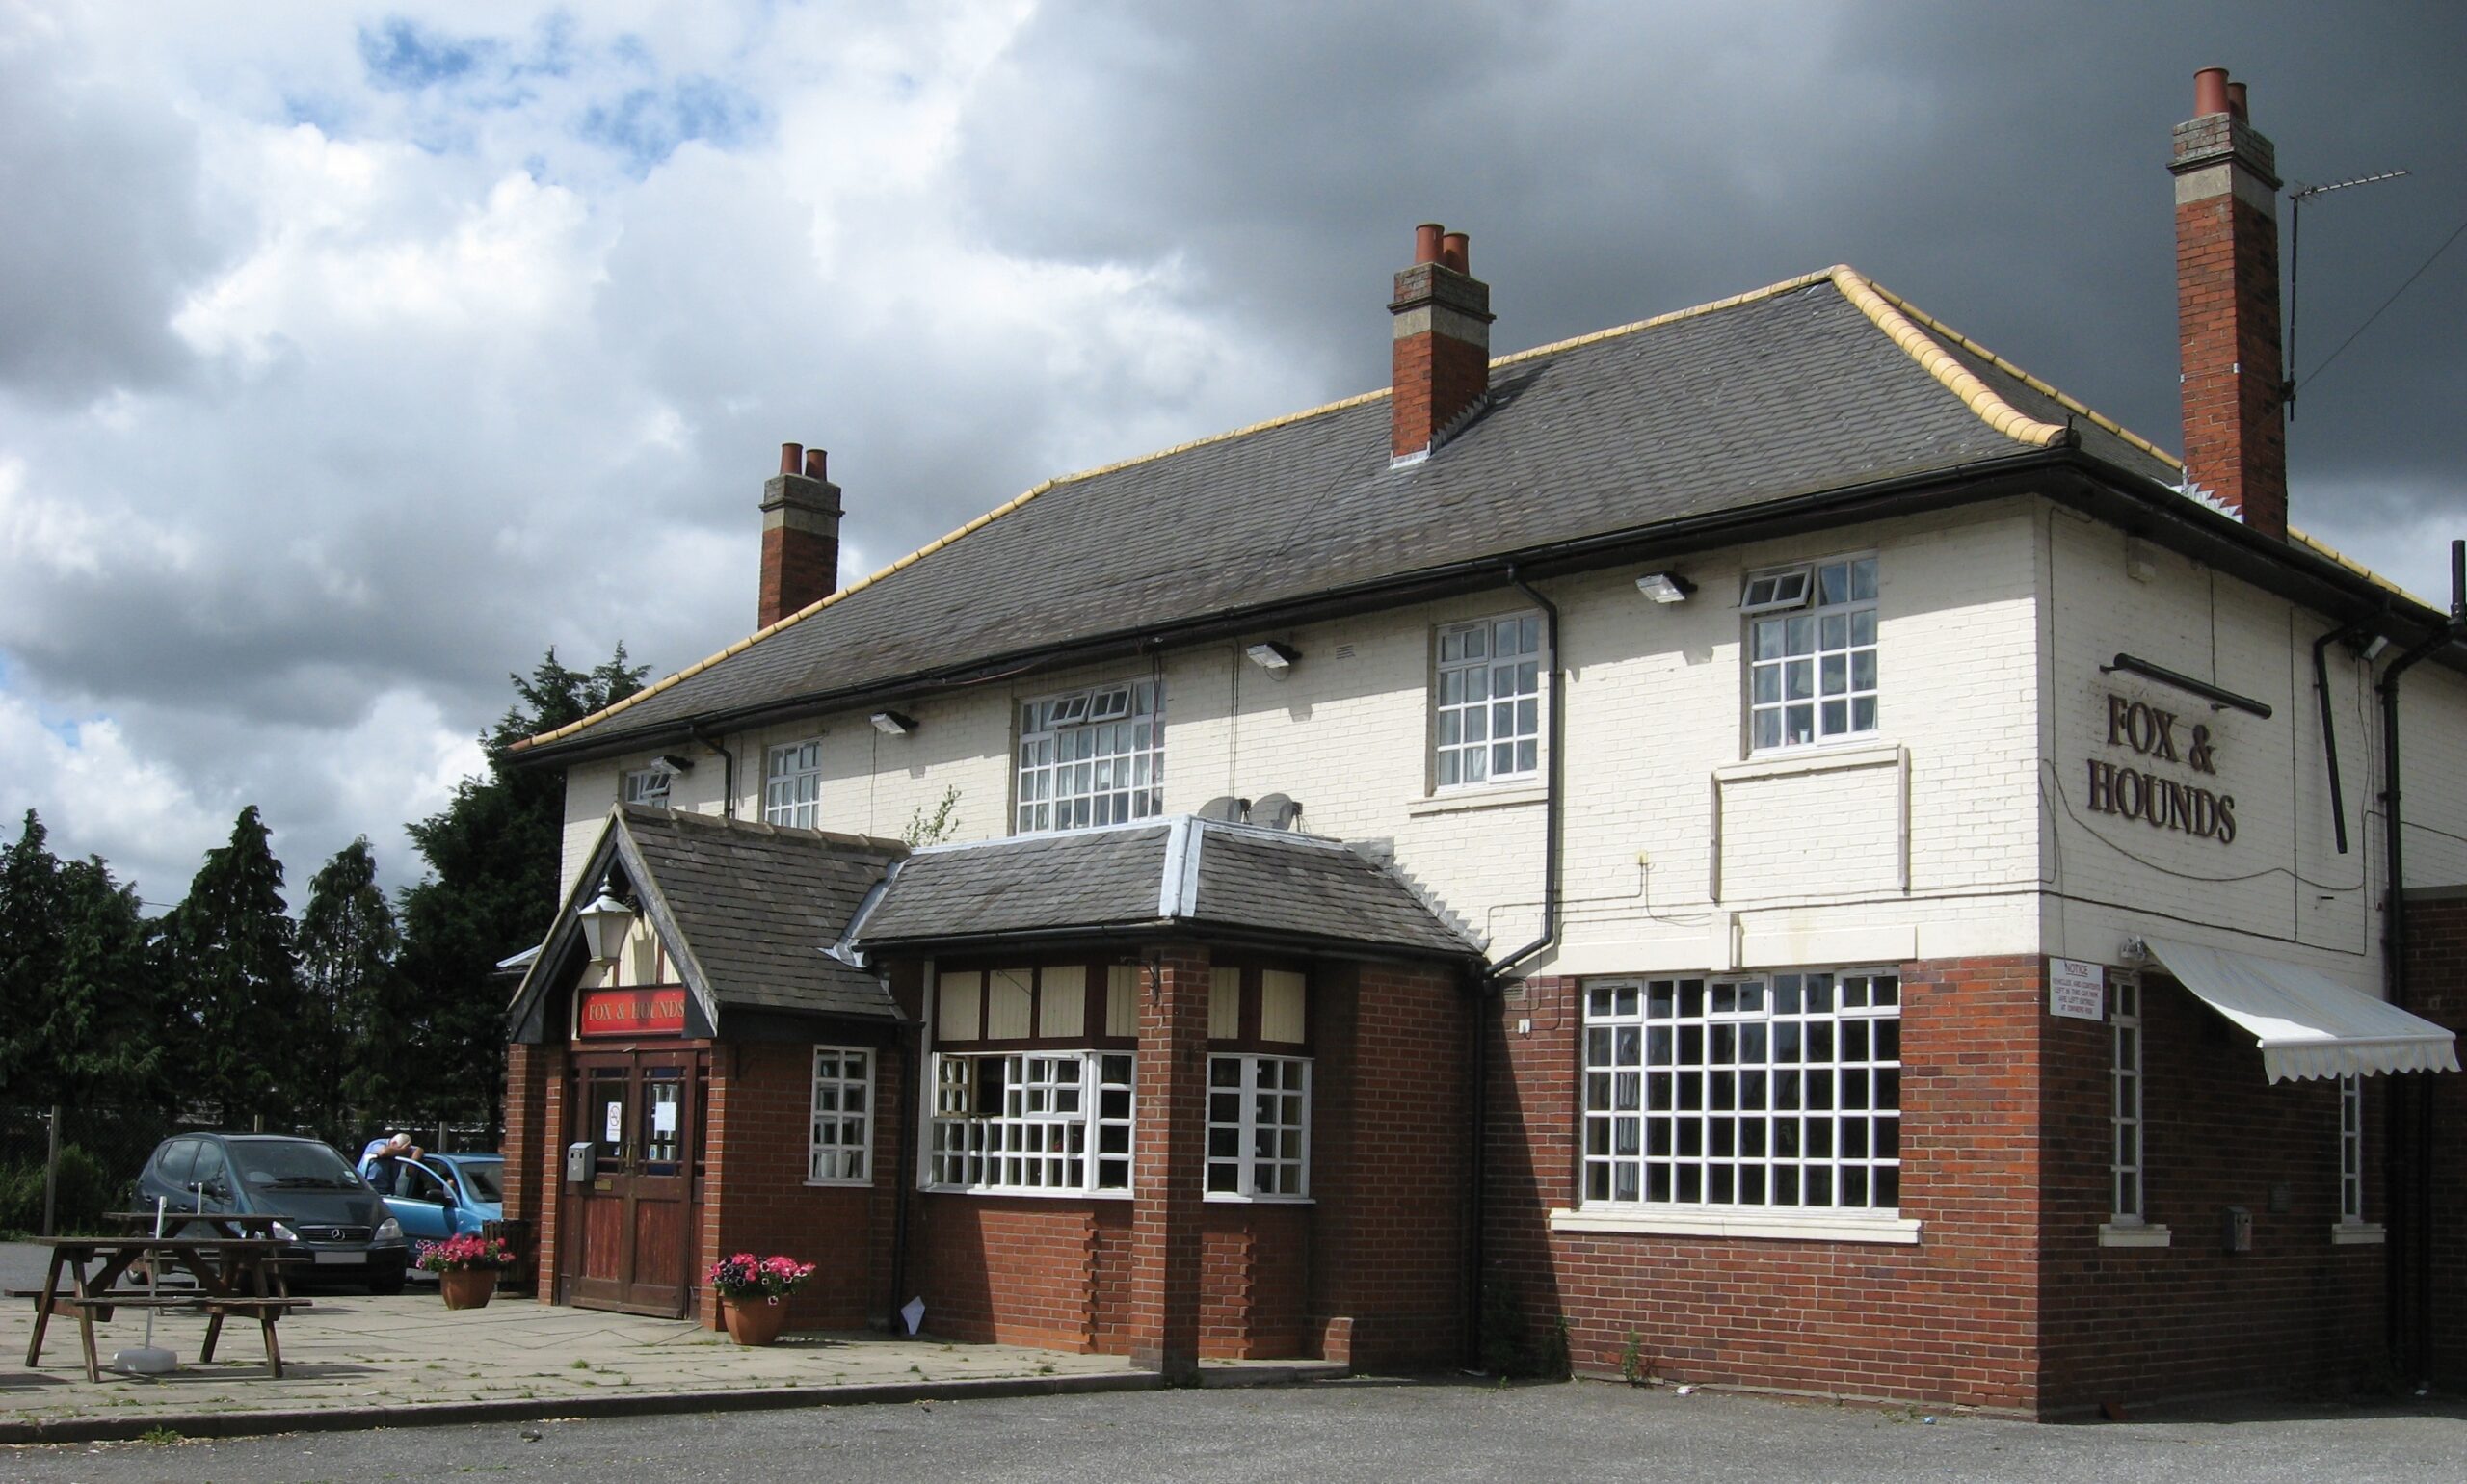 Pubs To Let In North Hykeham - Run The Fox & Hounds !